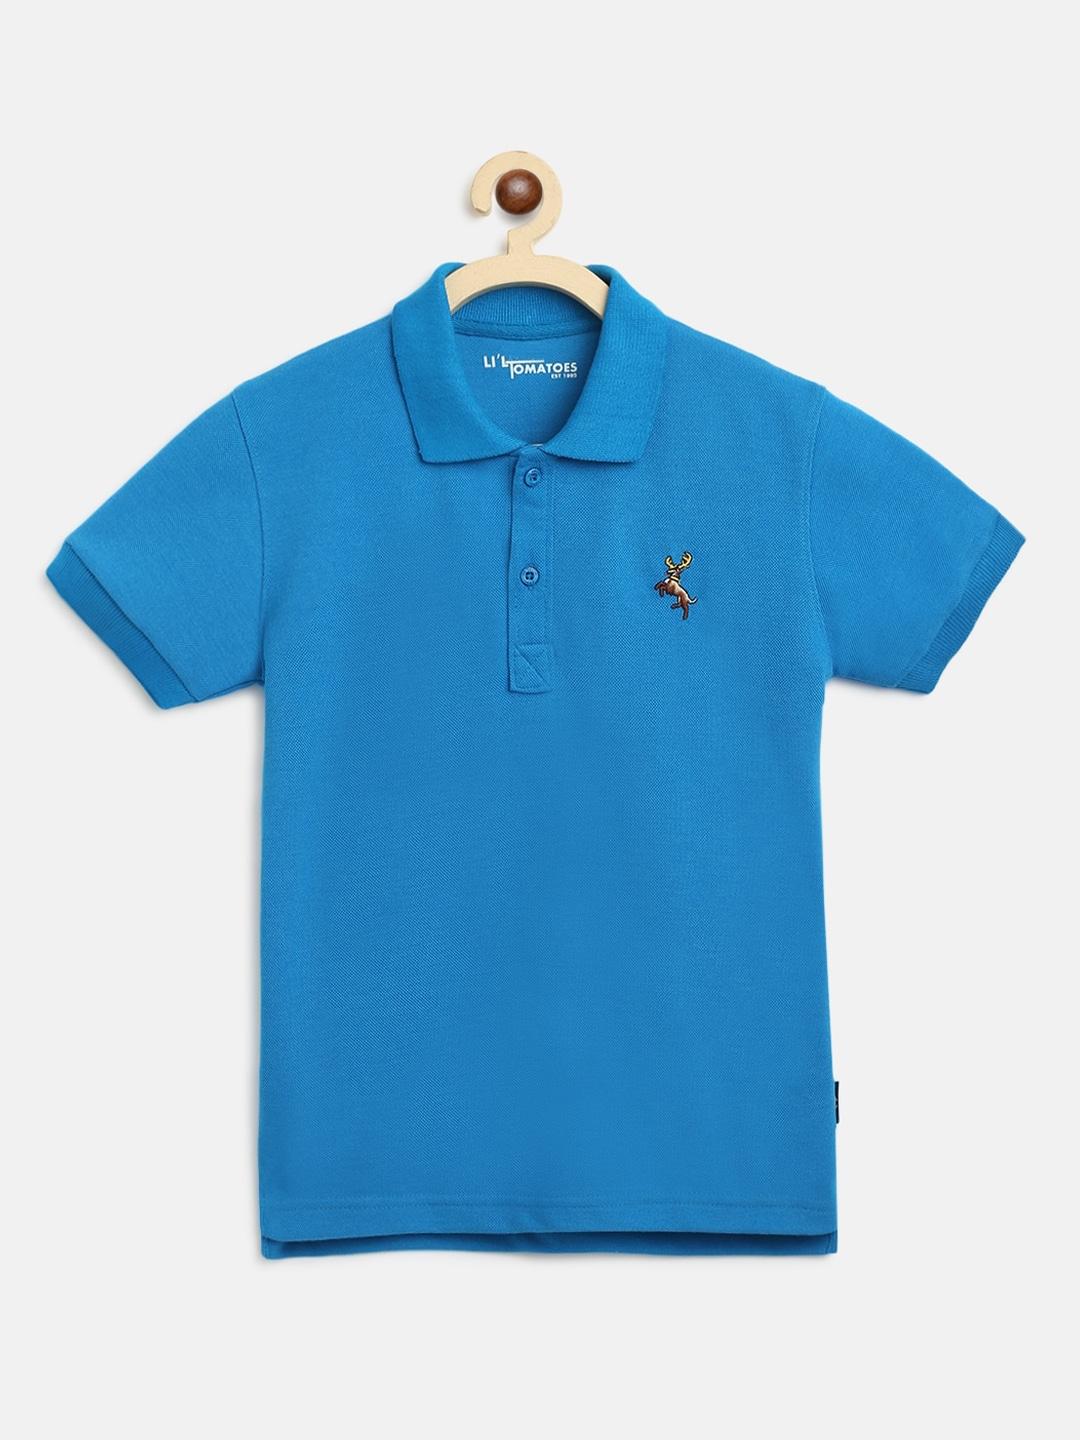 lil-tomatoes-boys-turquoise-blue-solid-polo-collar-t-shirt